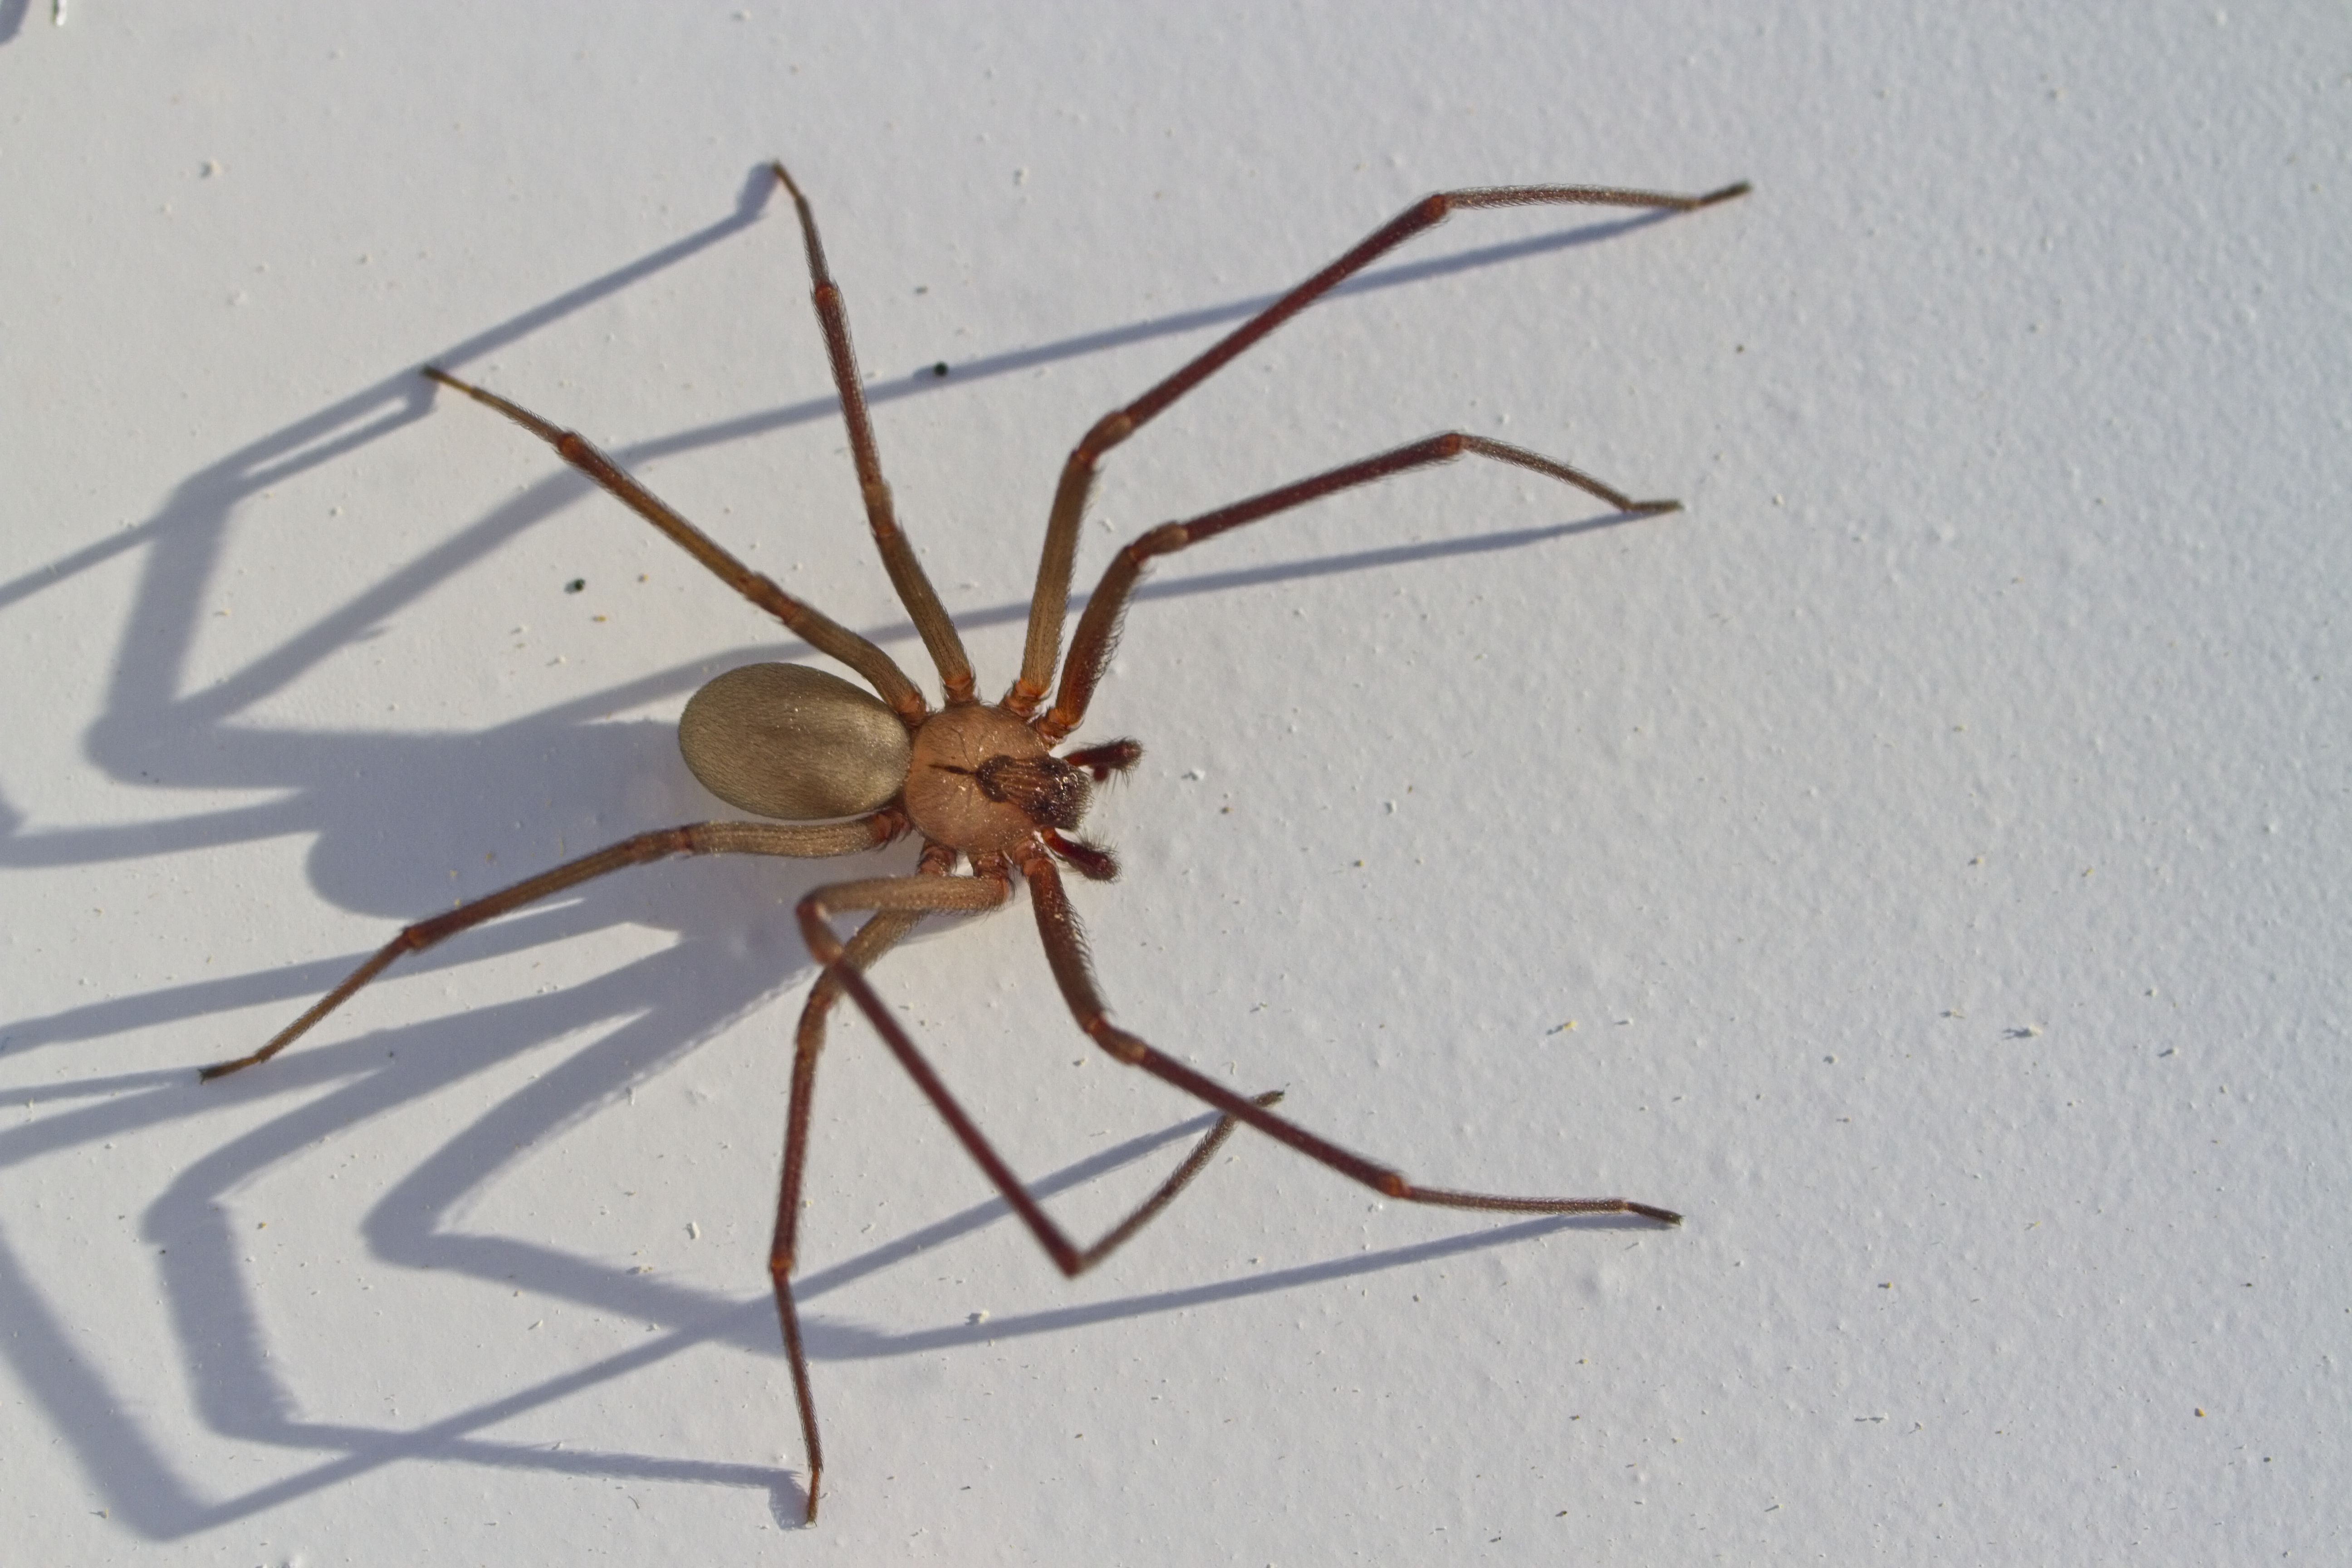 Are the Spiders in My House Dangerous? - Plunkett's Pest Control